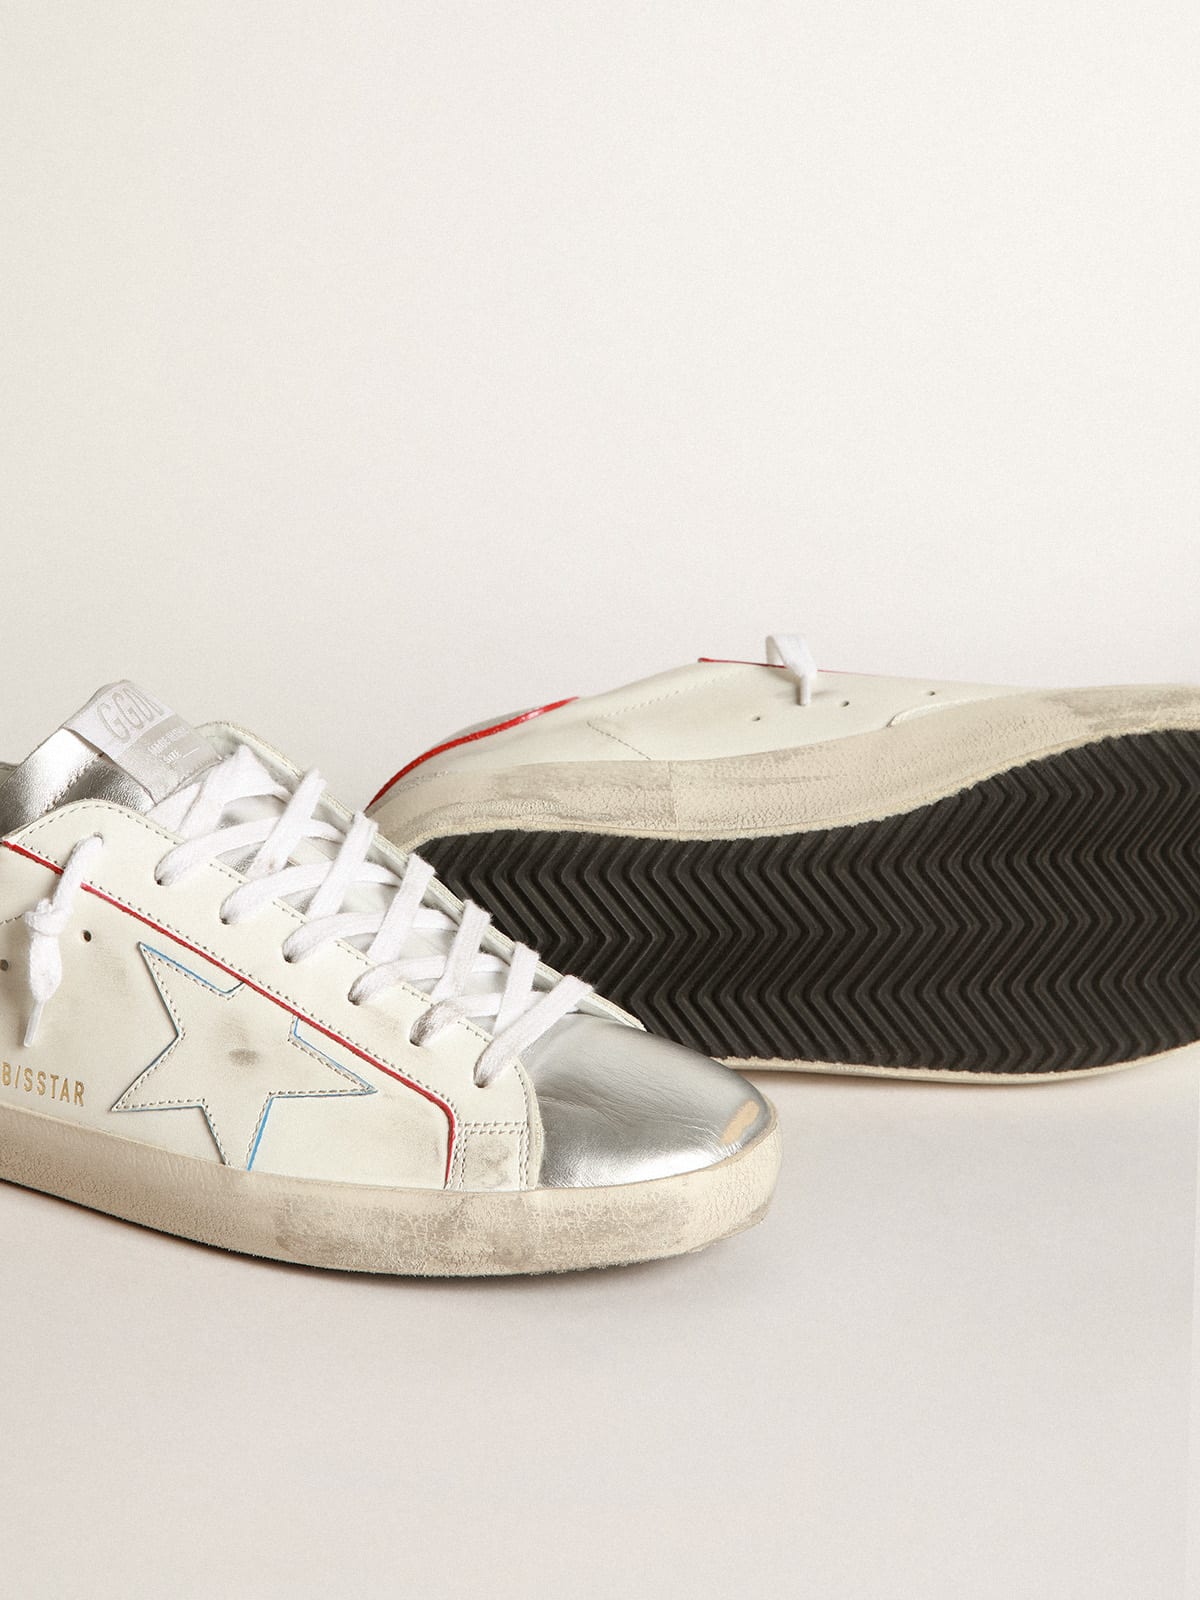 Golden Goose - Super-Star sneakers with silver laminated leather inserts and red and blue edging in 